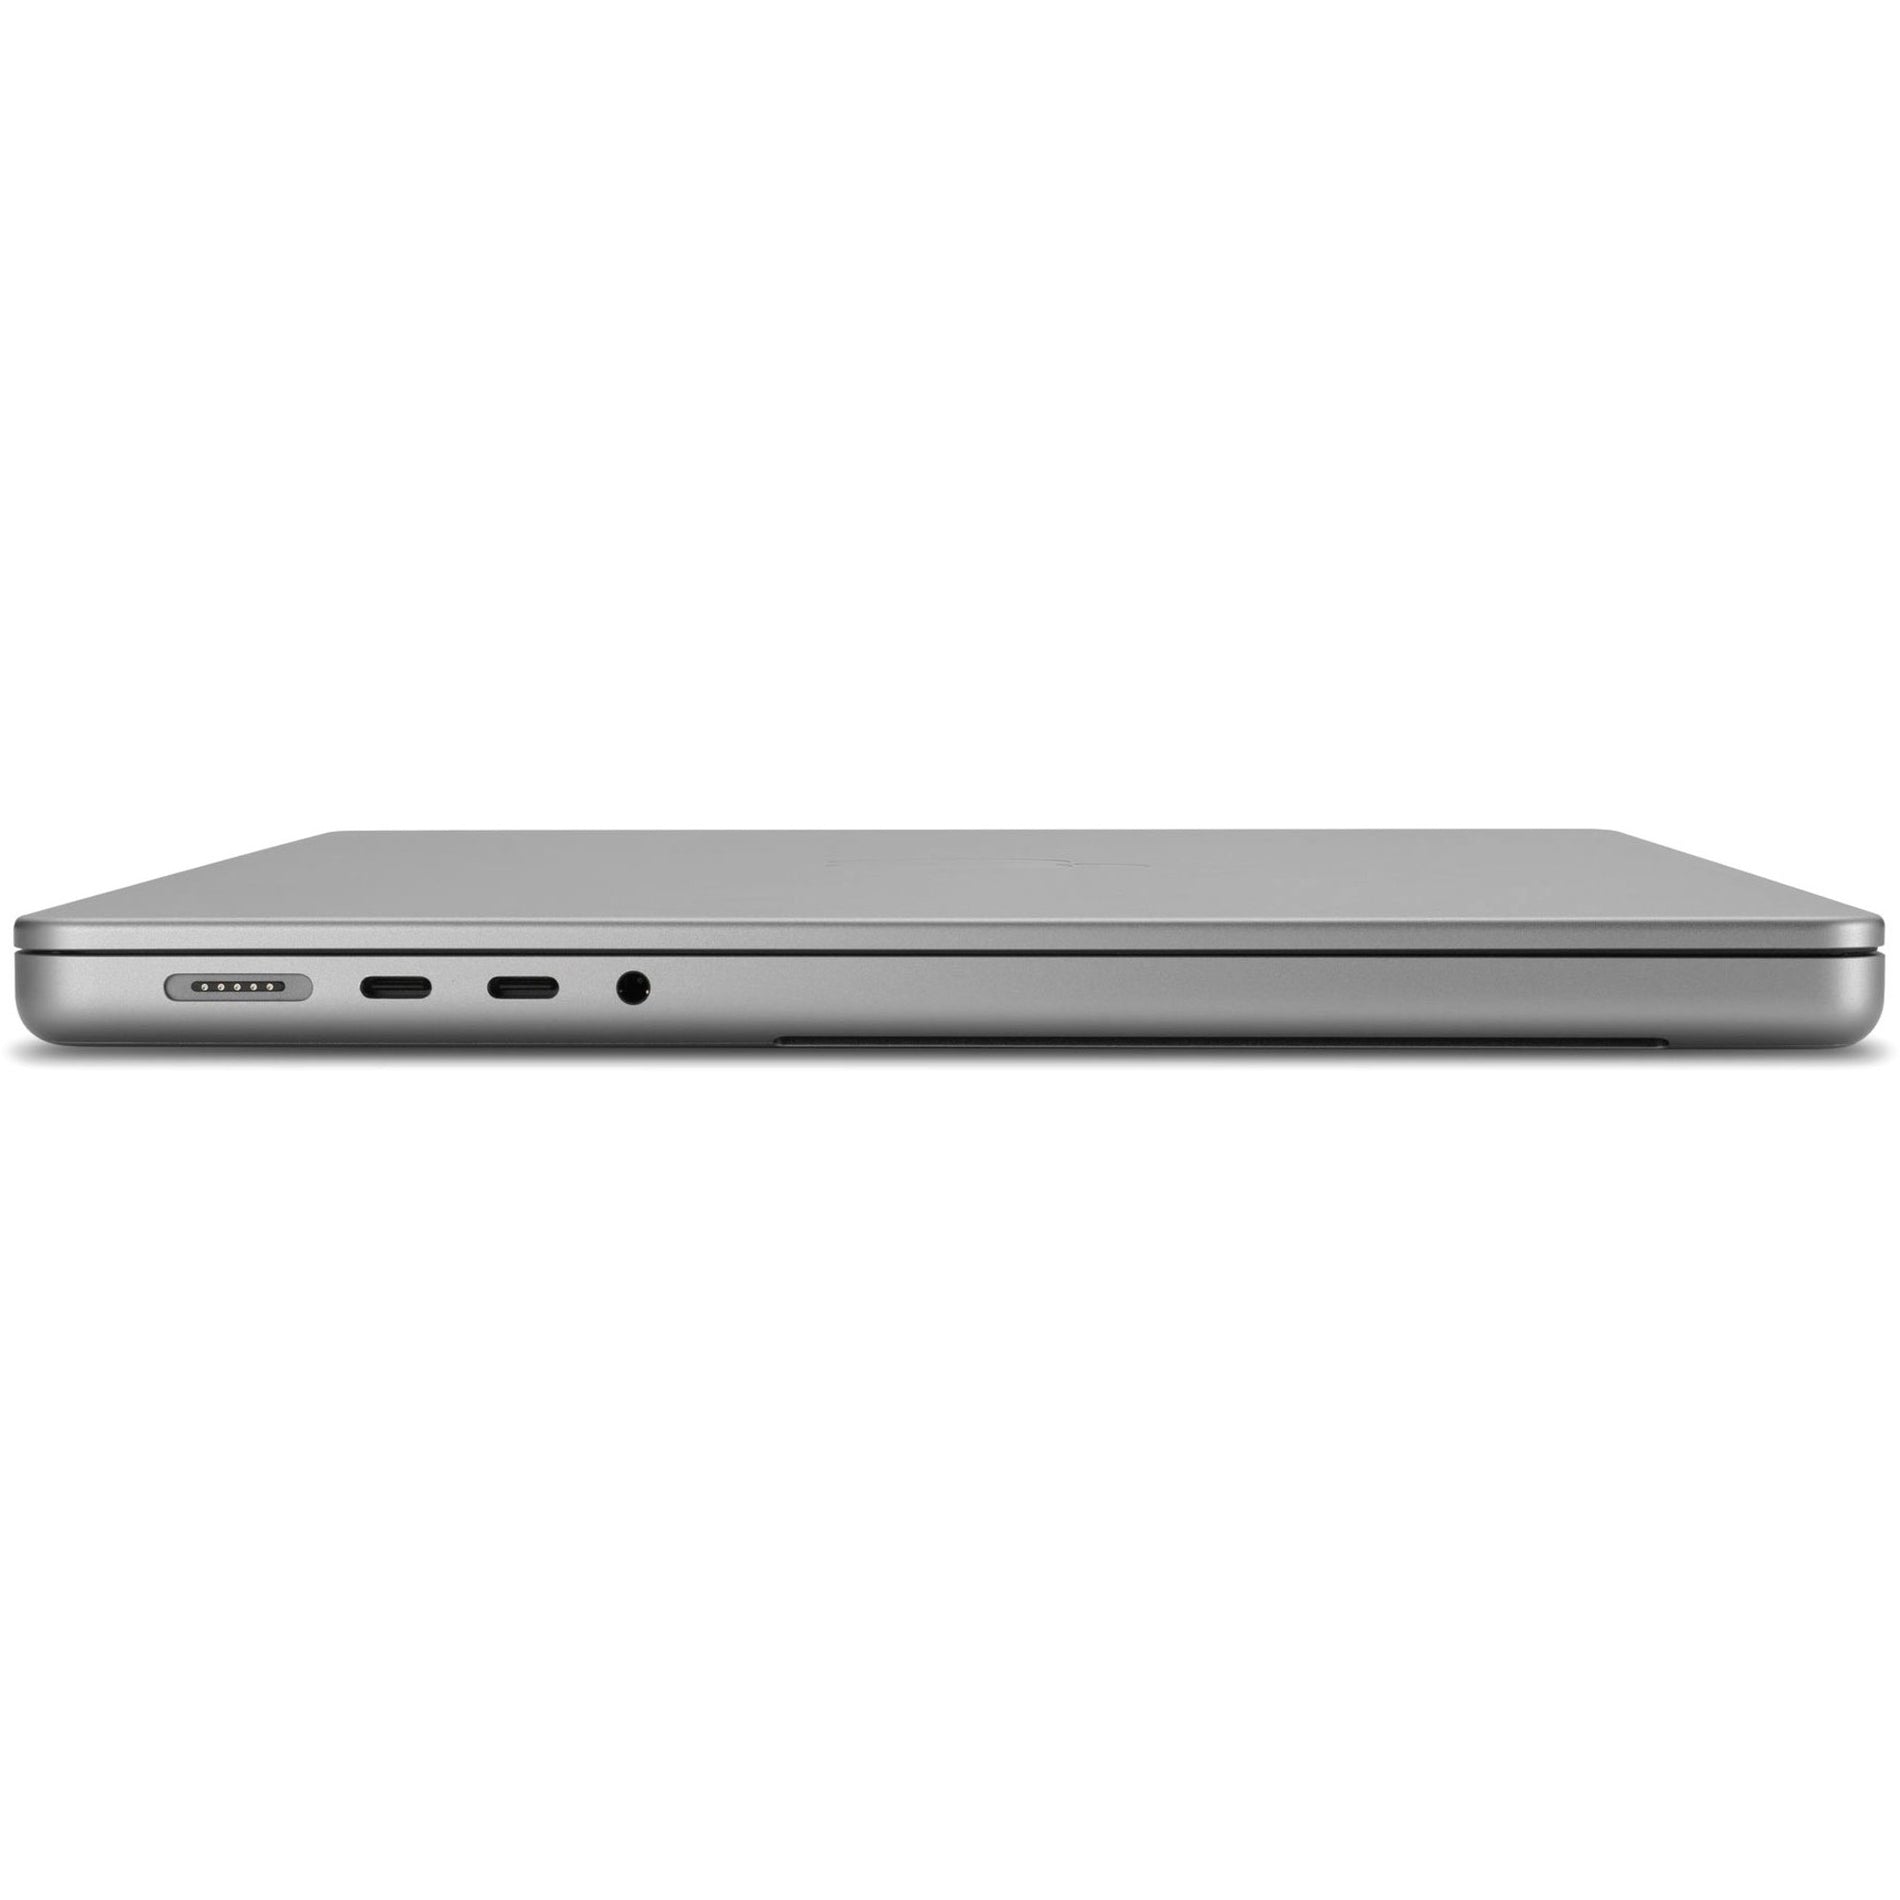 Kensington K58371WW MagPro Elite Magnetic Privacy Screen for MacBook Pro 16", Protect Your Privacy and Enhance Your MacBook Pro Experience